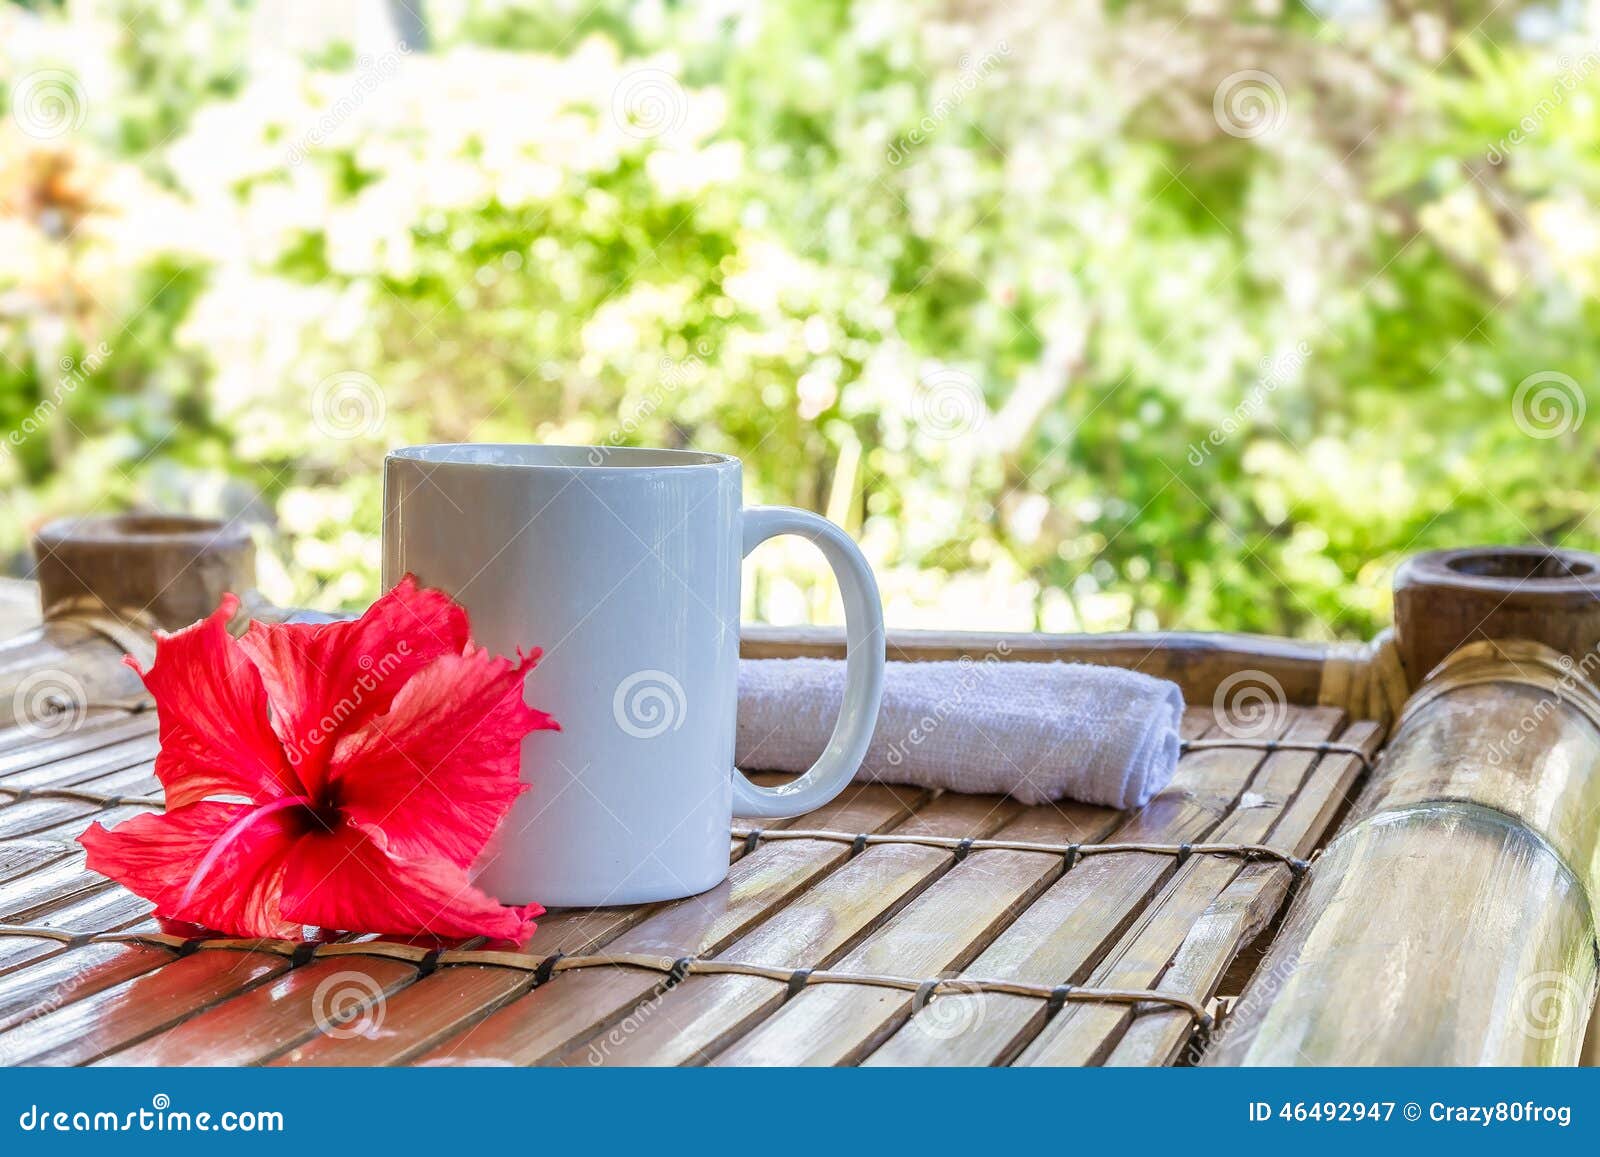 mug with cappuchino on bamboo table, coffee cup in the mor